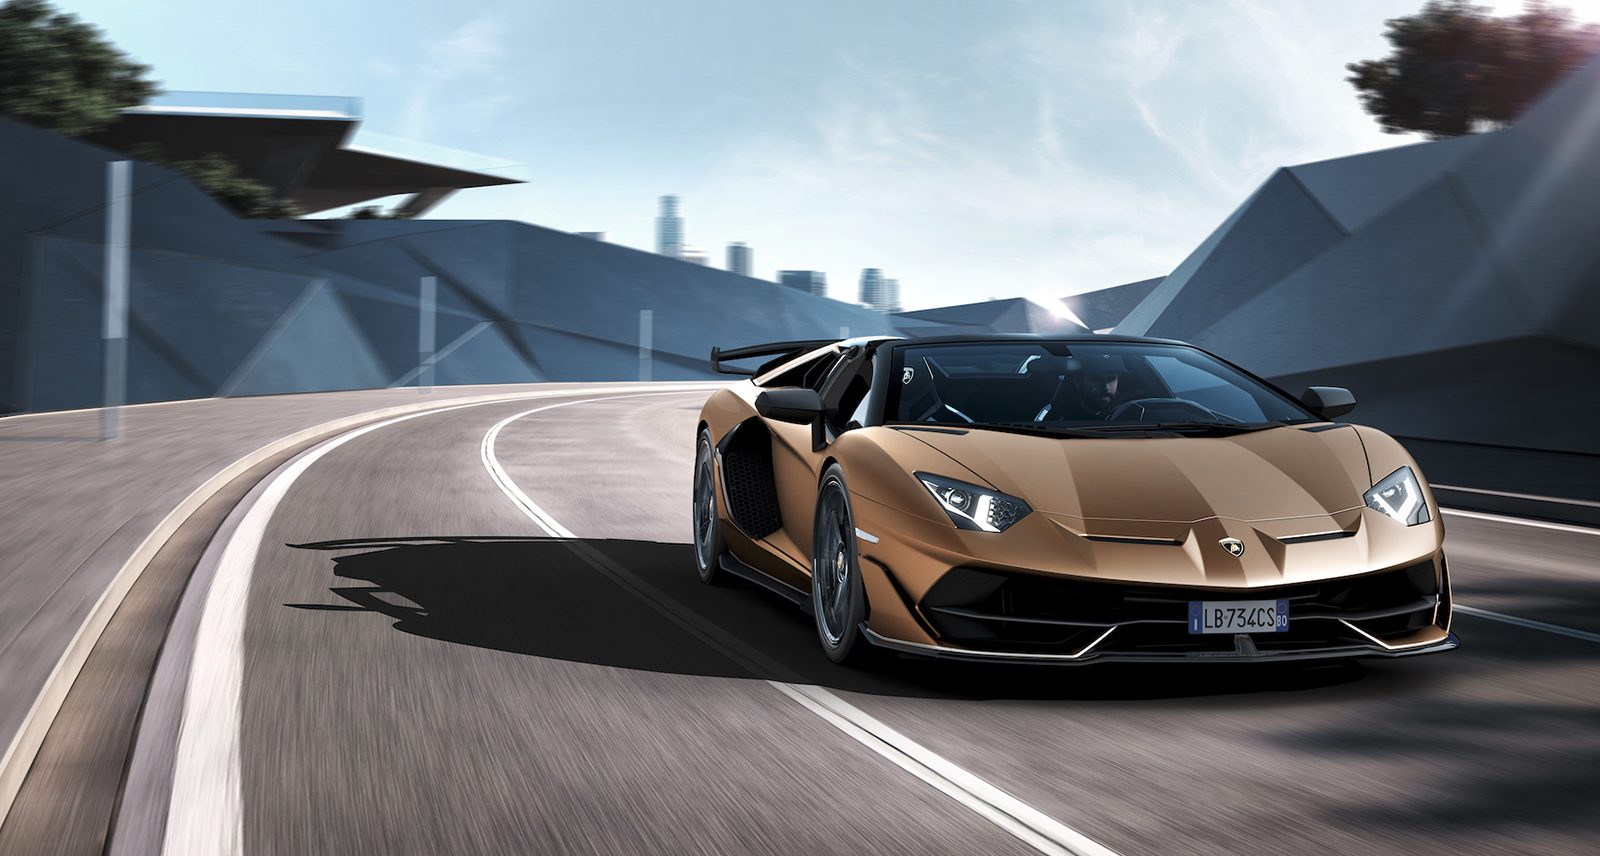 Lamborghini's Drop-Top Aventador SVJ Roadster Is Ready for Summer and So Are We